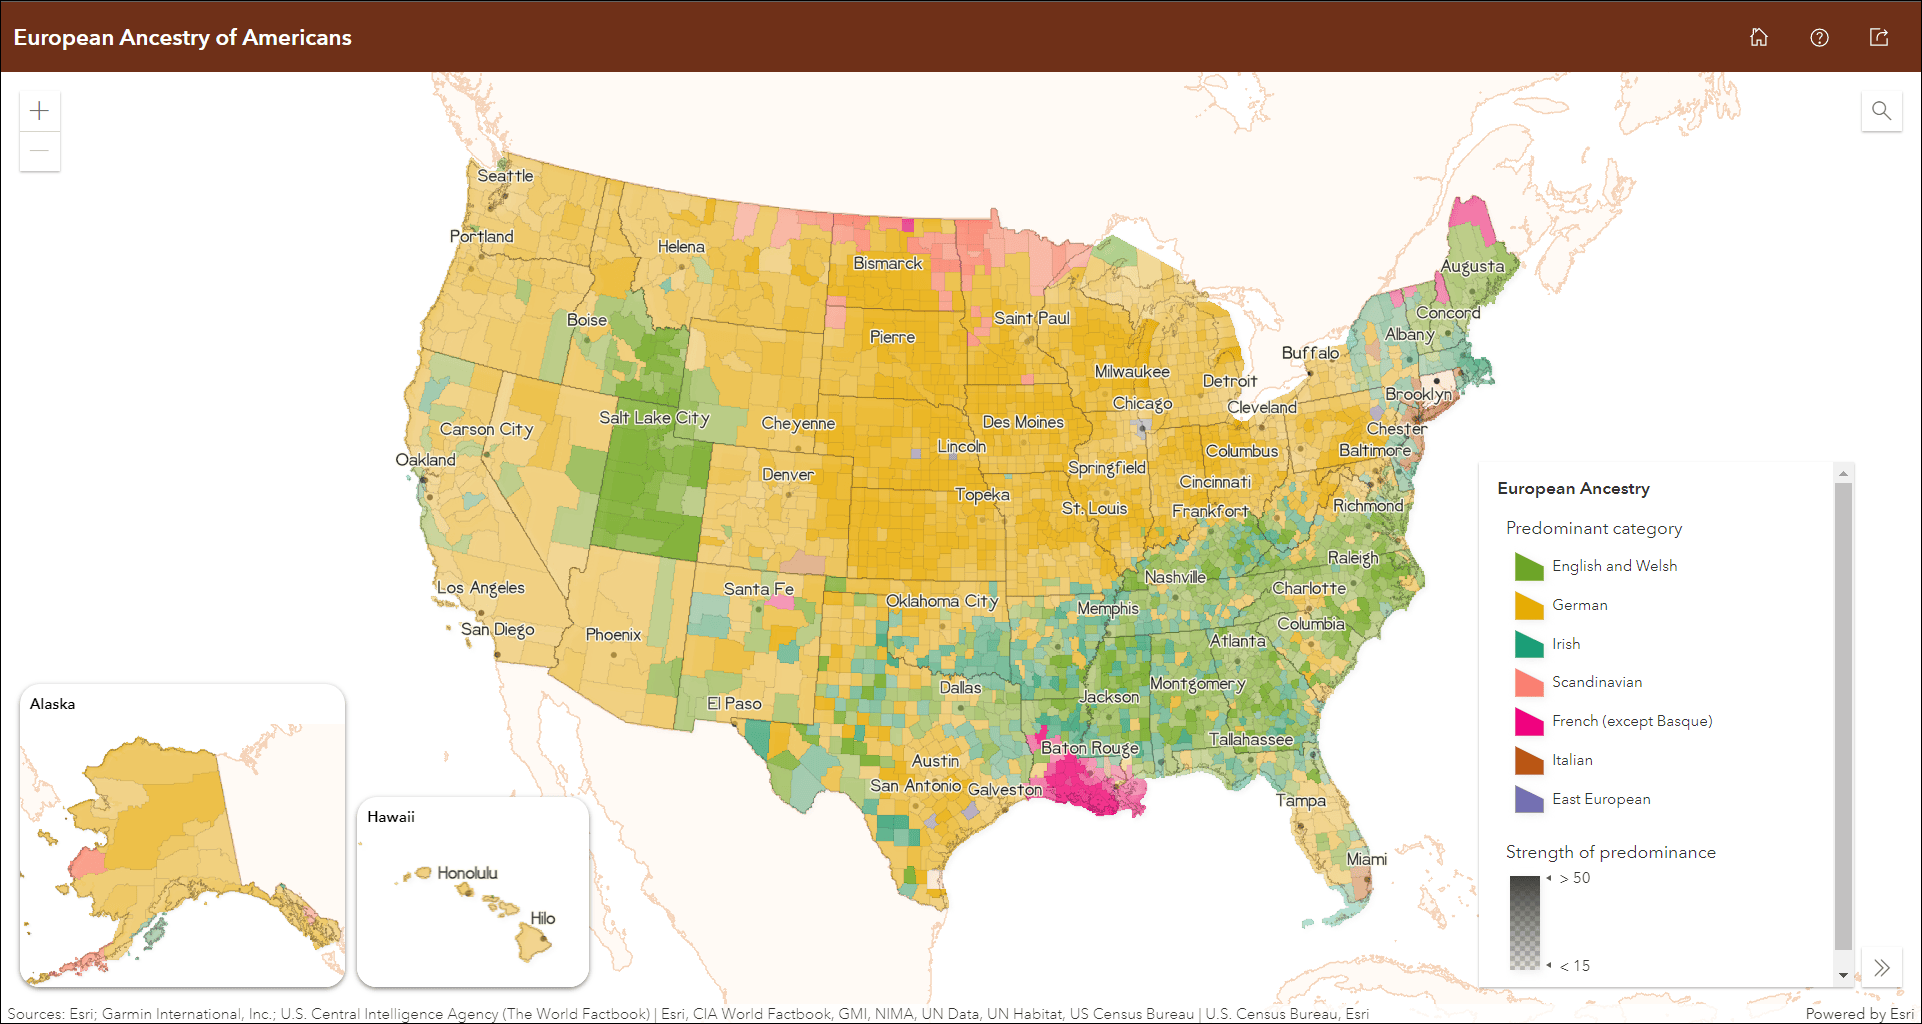 European ancestry of Americans data mapped in the contiguous US with Alaska and Hawaii shown in the bottom left inside of inset maps.